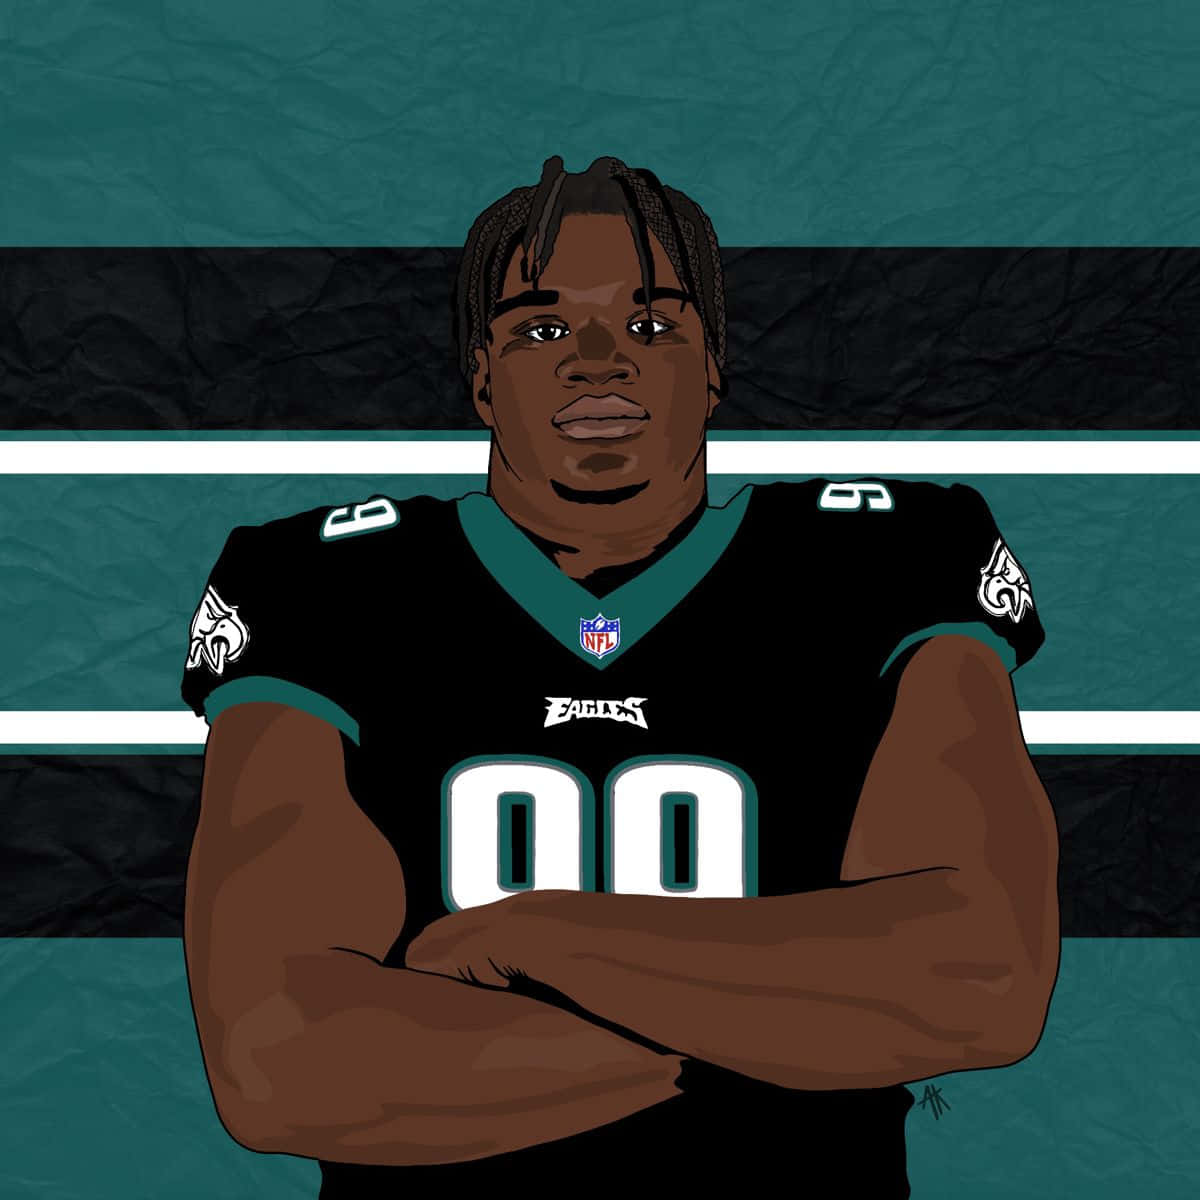 Illustrated Football Player Crossed Arms Wallpaper